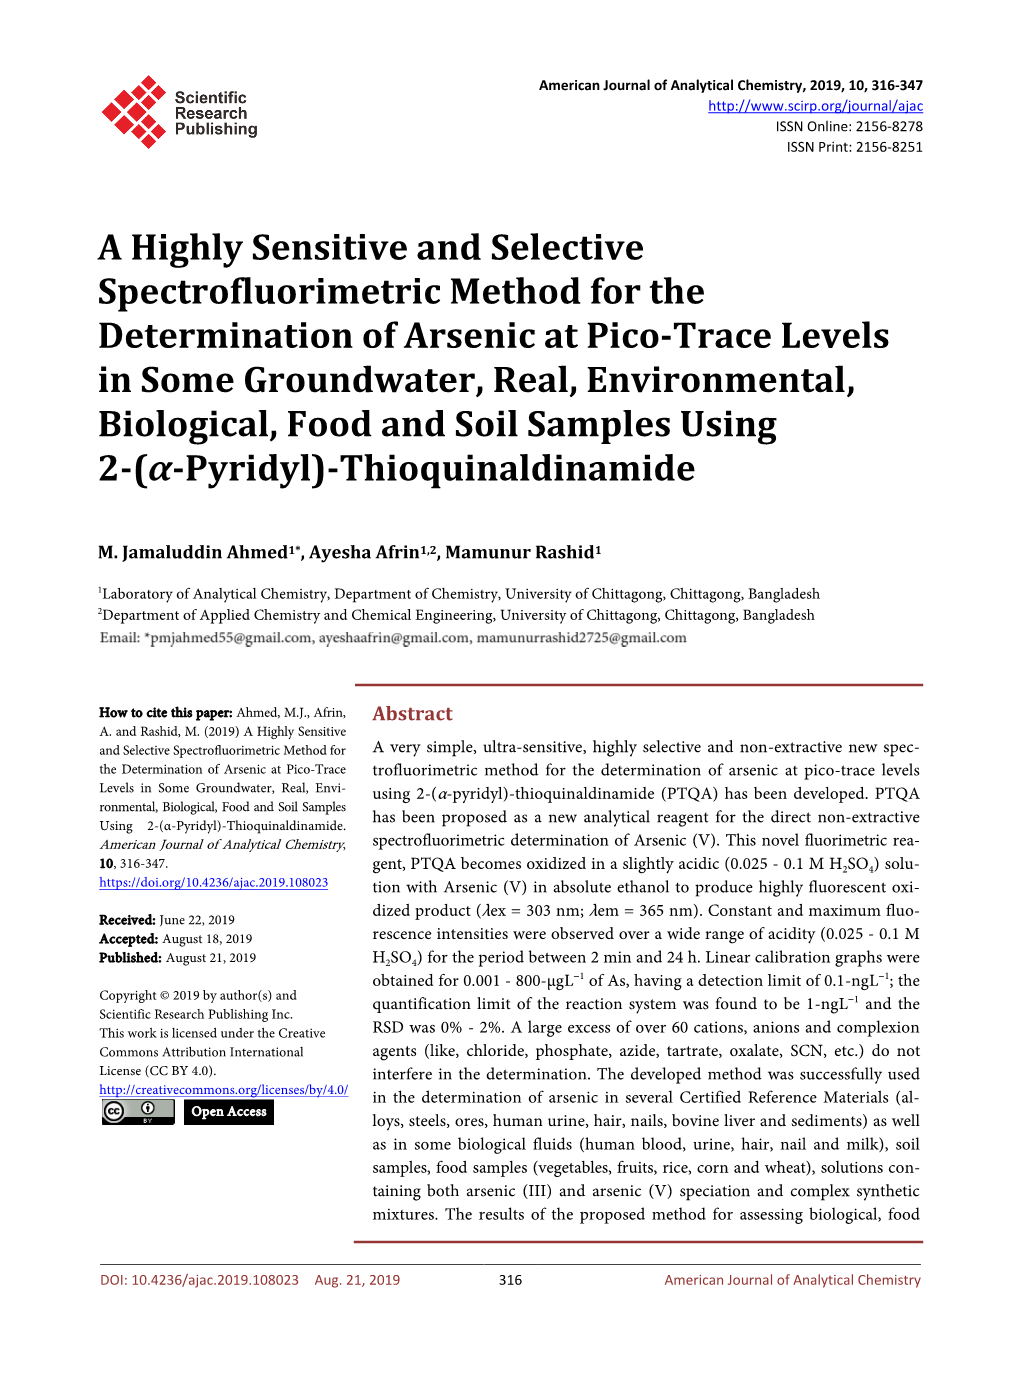 A Highly Sensitive and Selective Spectrofluorimetric Method for The